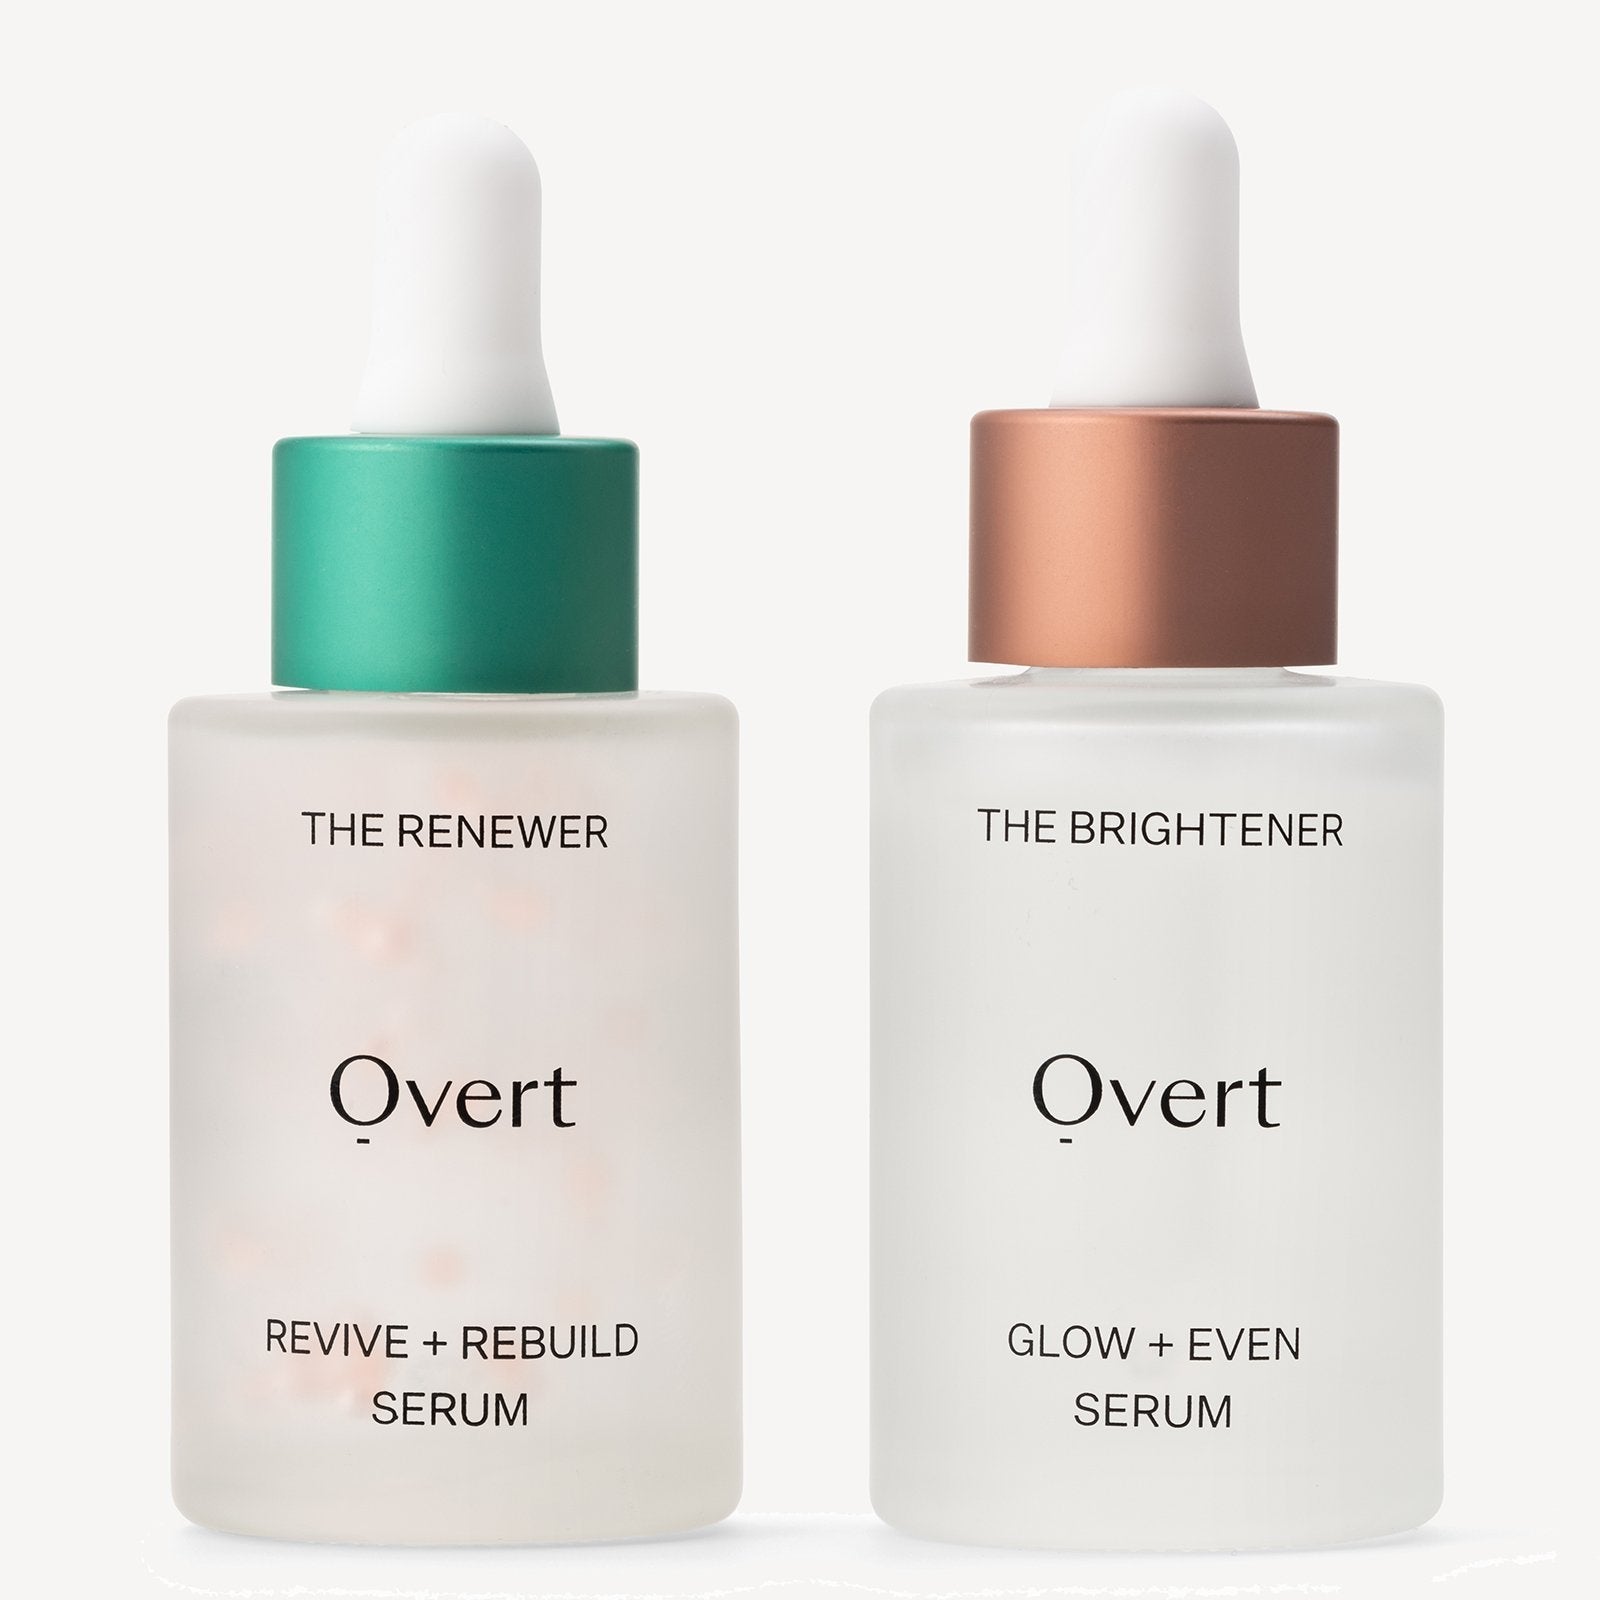 The Retexturizing Duo by Overt